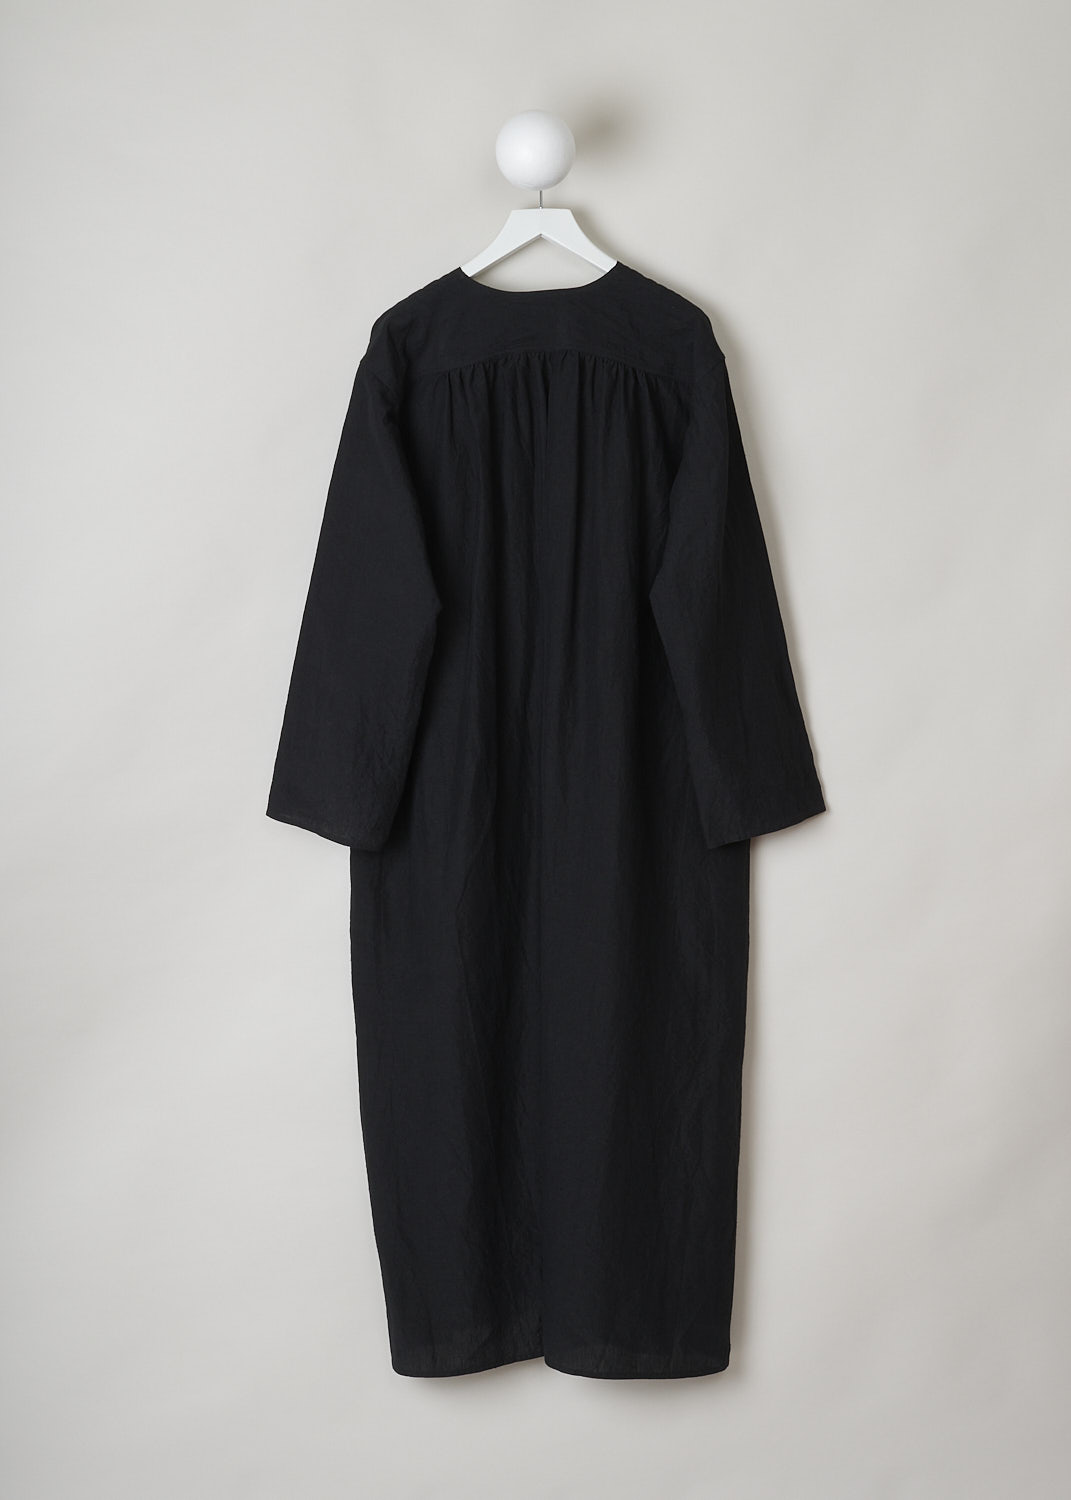 SOFIE Dâ€™HOORE, BLACK LINEN DELIZA DRESS, DELIZA_LIFE_BLACK, Black, Back,This black linen dress has a round neckline that goes into a deep V cutout. Subtle ruching can be found beneath the V. This long sleeve midi dress has a straight hemline with an asymmetrical finish, meaning the back is a little longer than the front. The dress has concealed slanted pockets and slits can be found on either side. The dress has a wide silhouette. 
